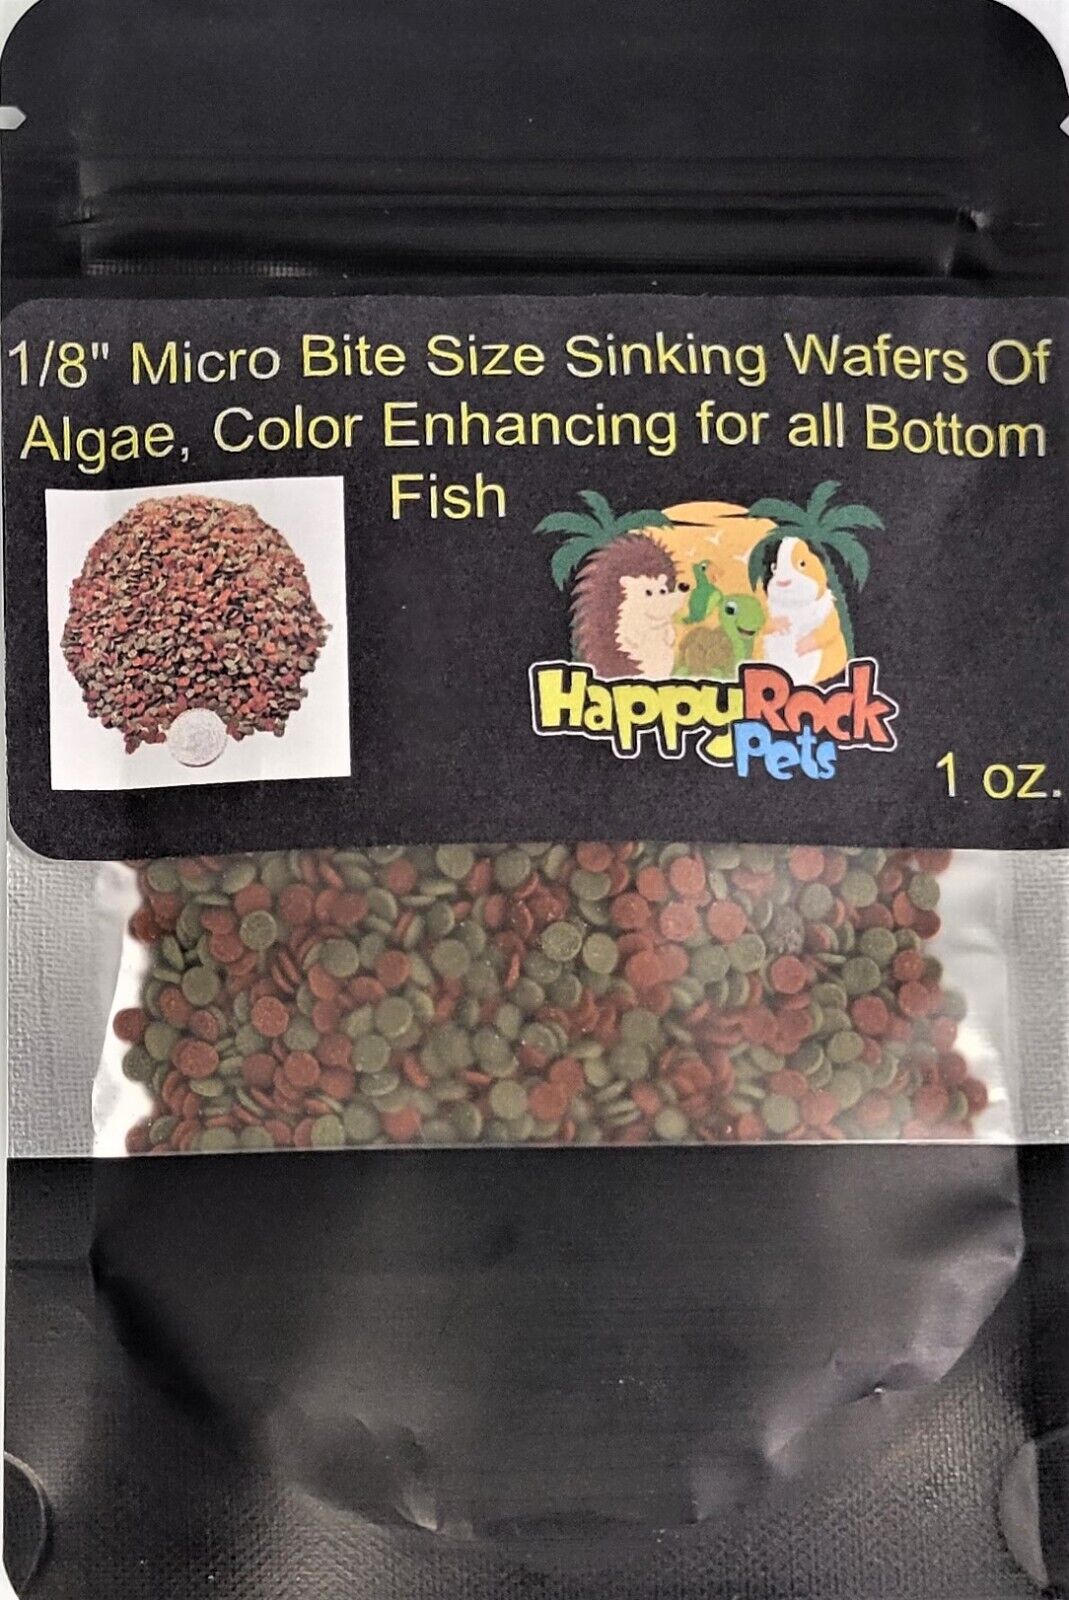 1/8" Micro Bite Size Sinking Wafers, Algae & Color Enhancing for All Bottom Fish